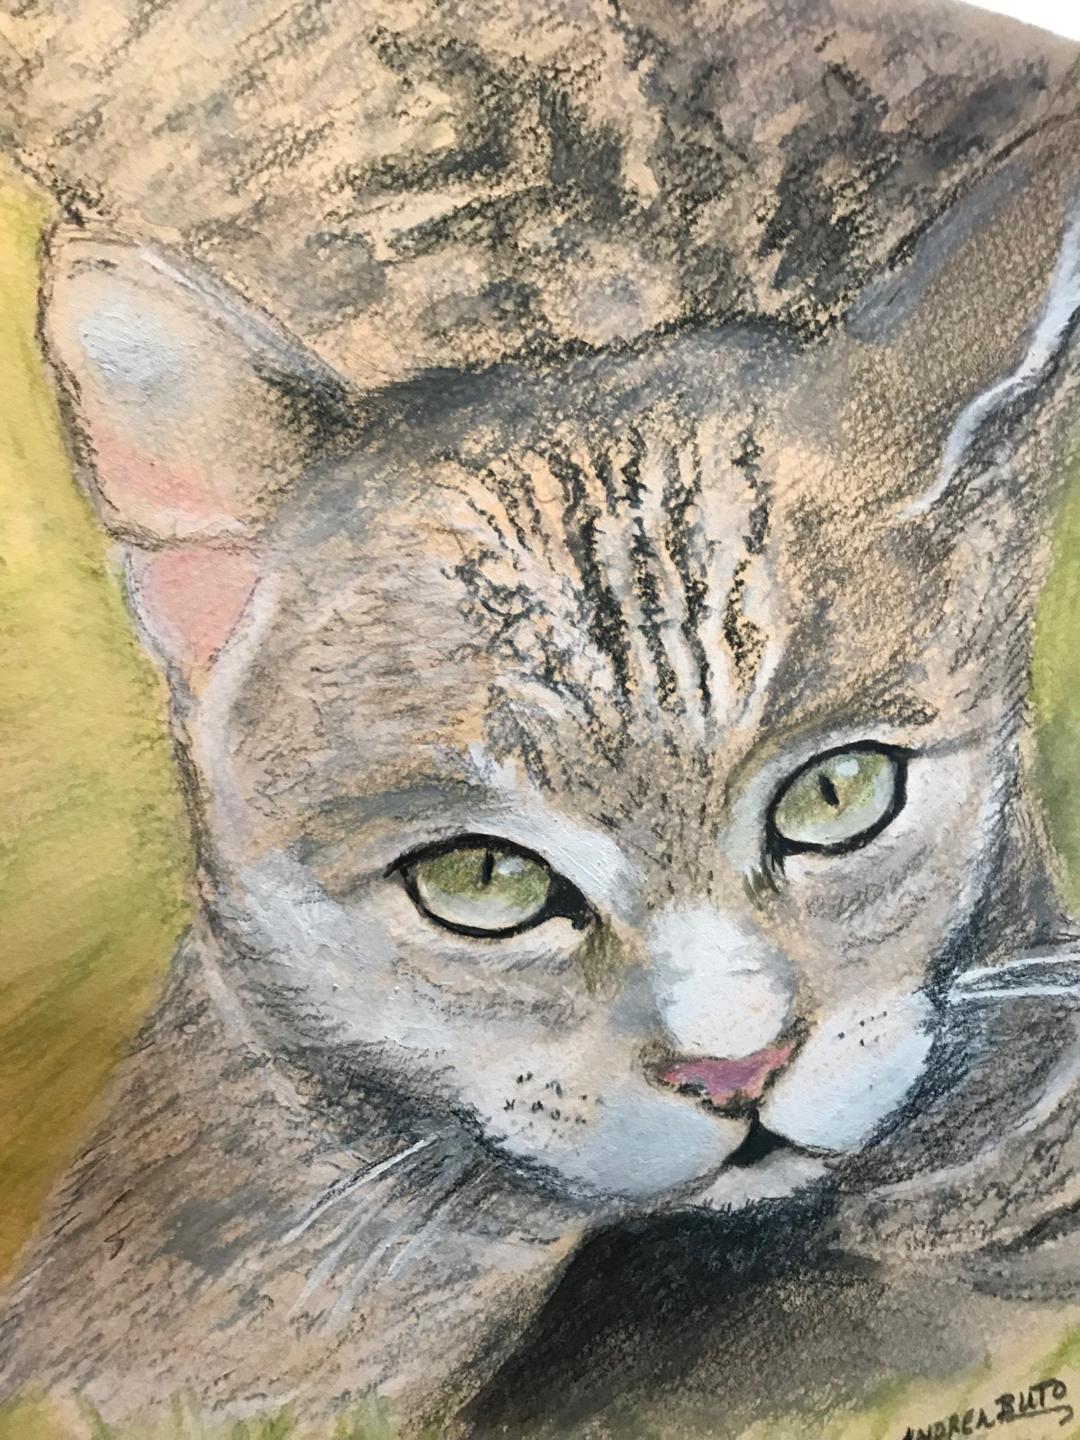 Artist Andrea B. can be commissioned to do a portrait of your beloved pet, kitten or puppy, cat or dog, from a quality photograph - at aciremA.com.